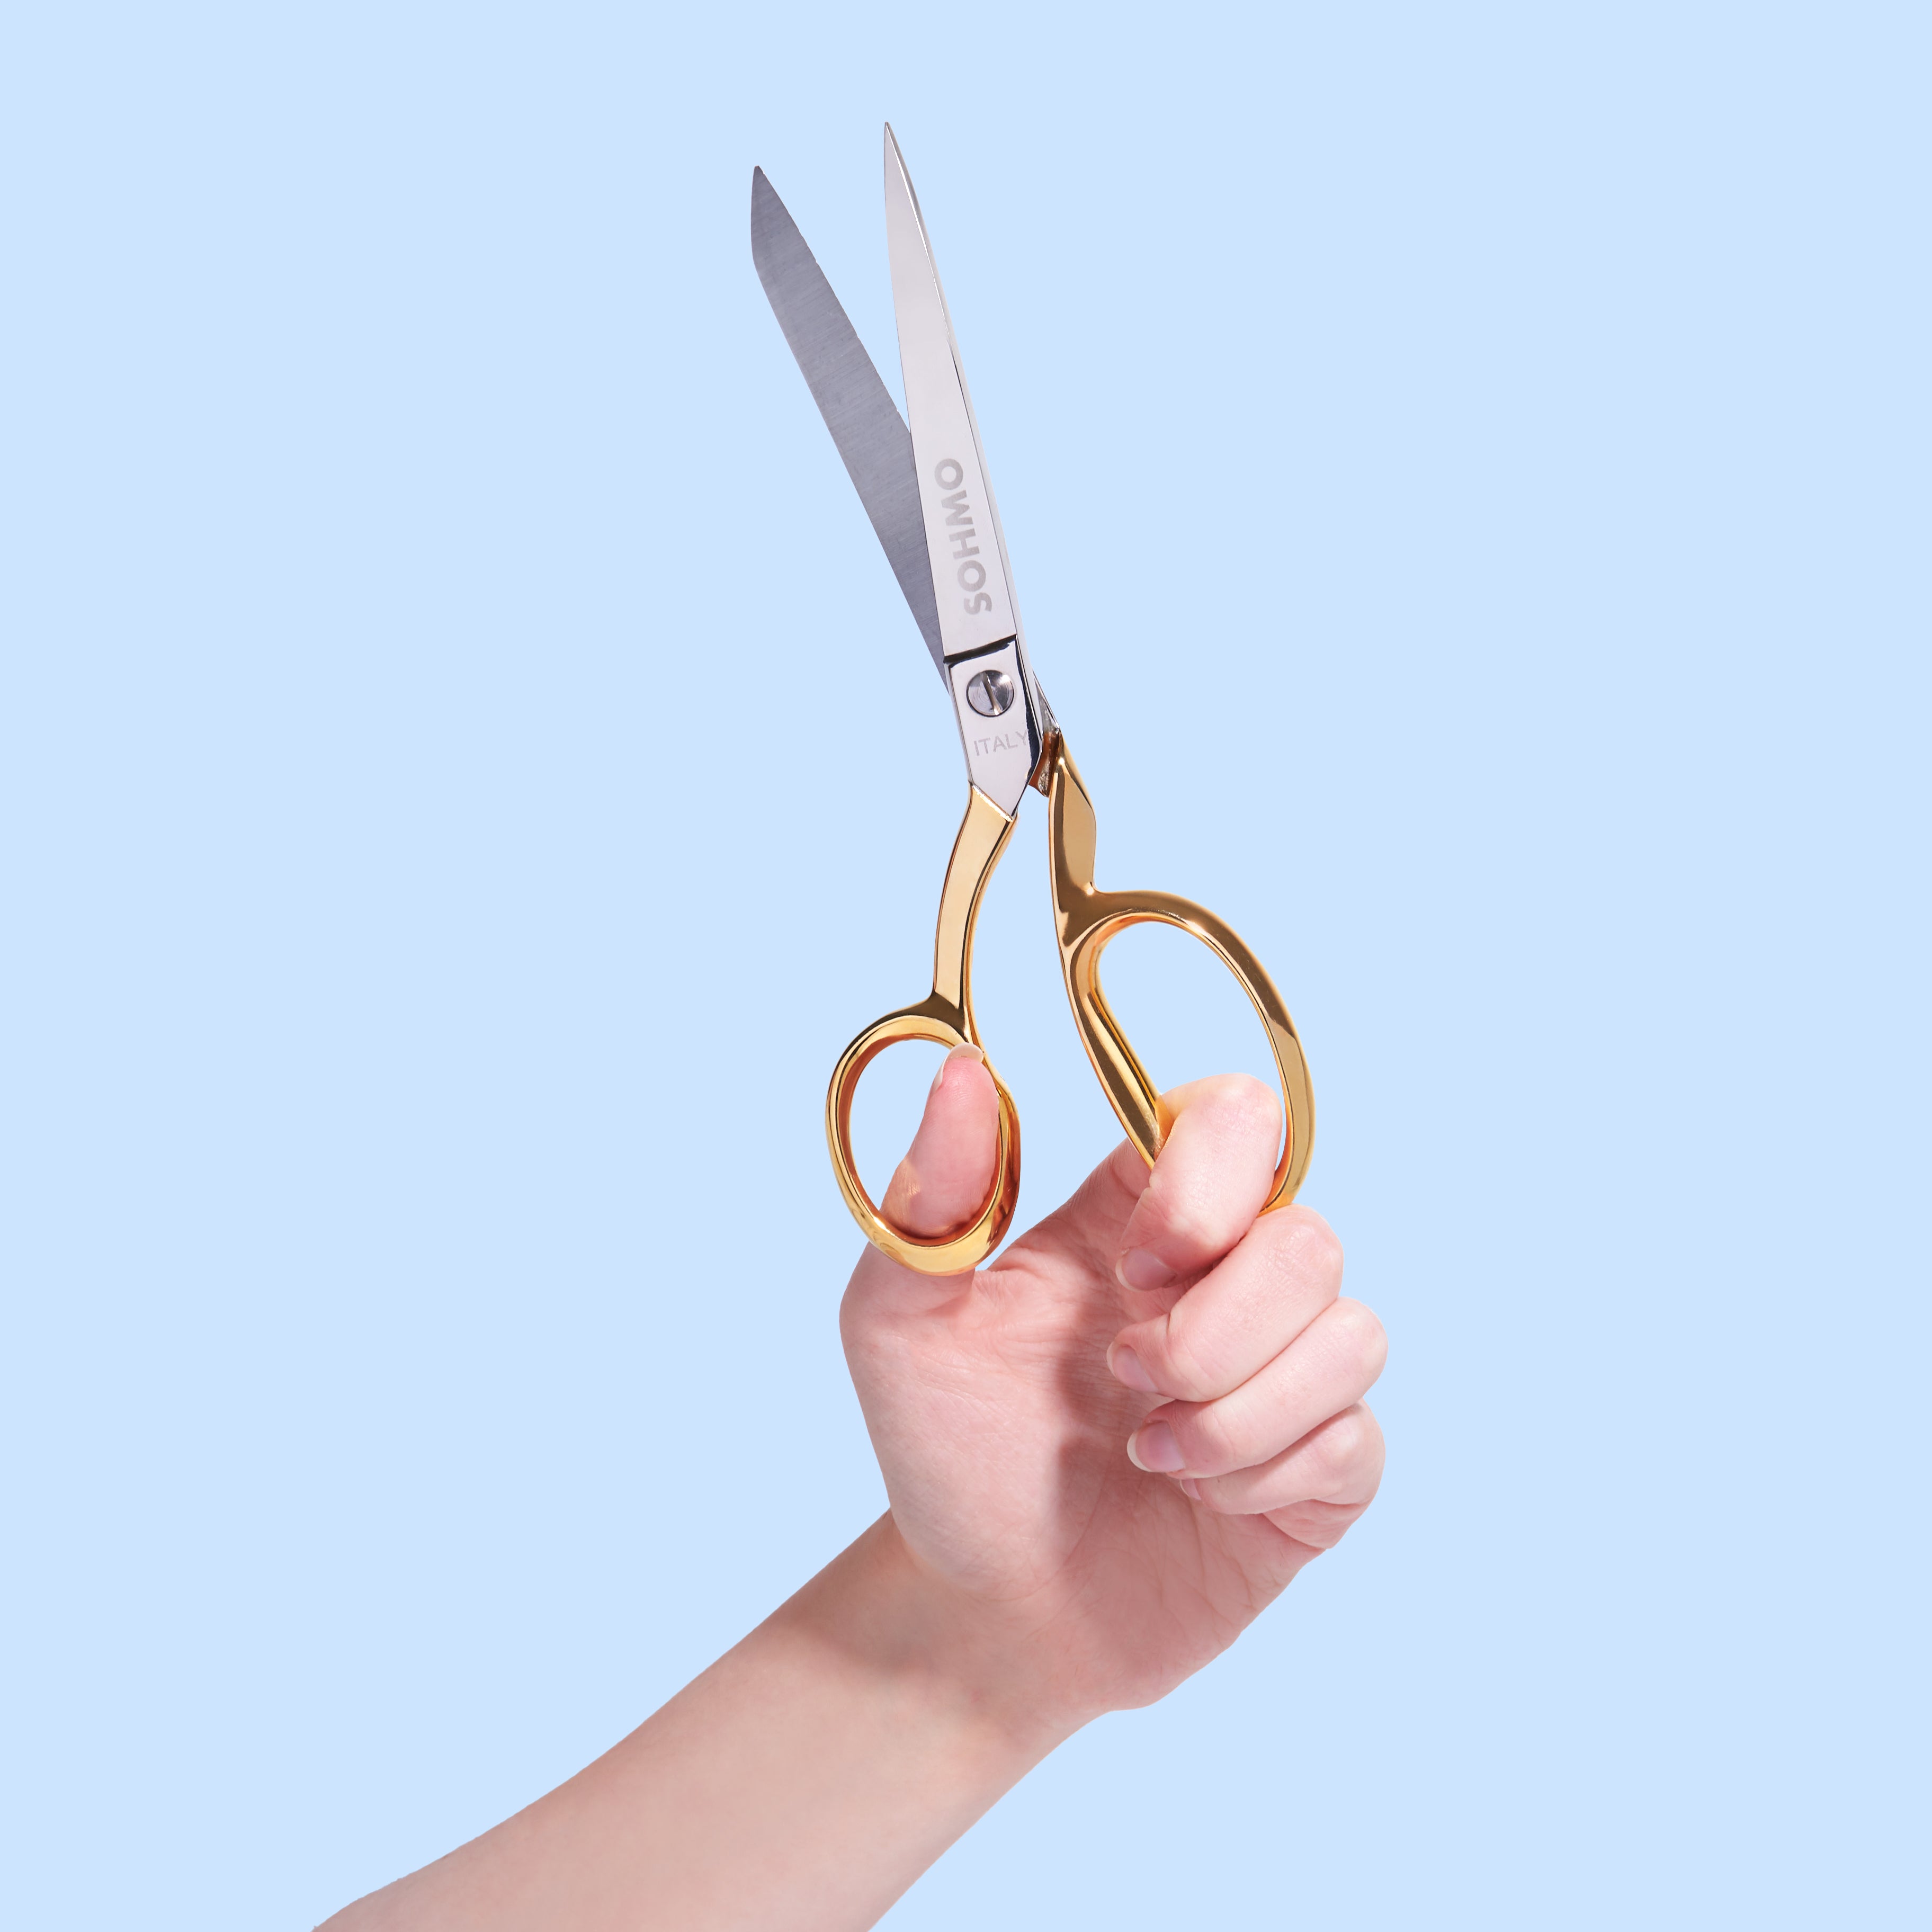 SOHMO Left handed sewing scissors with gold handles